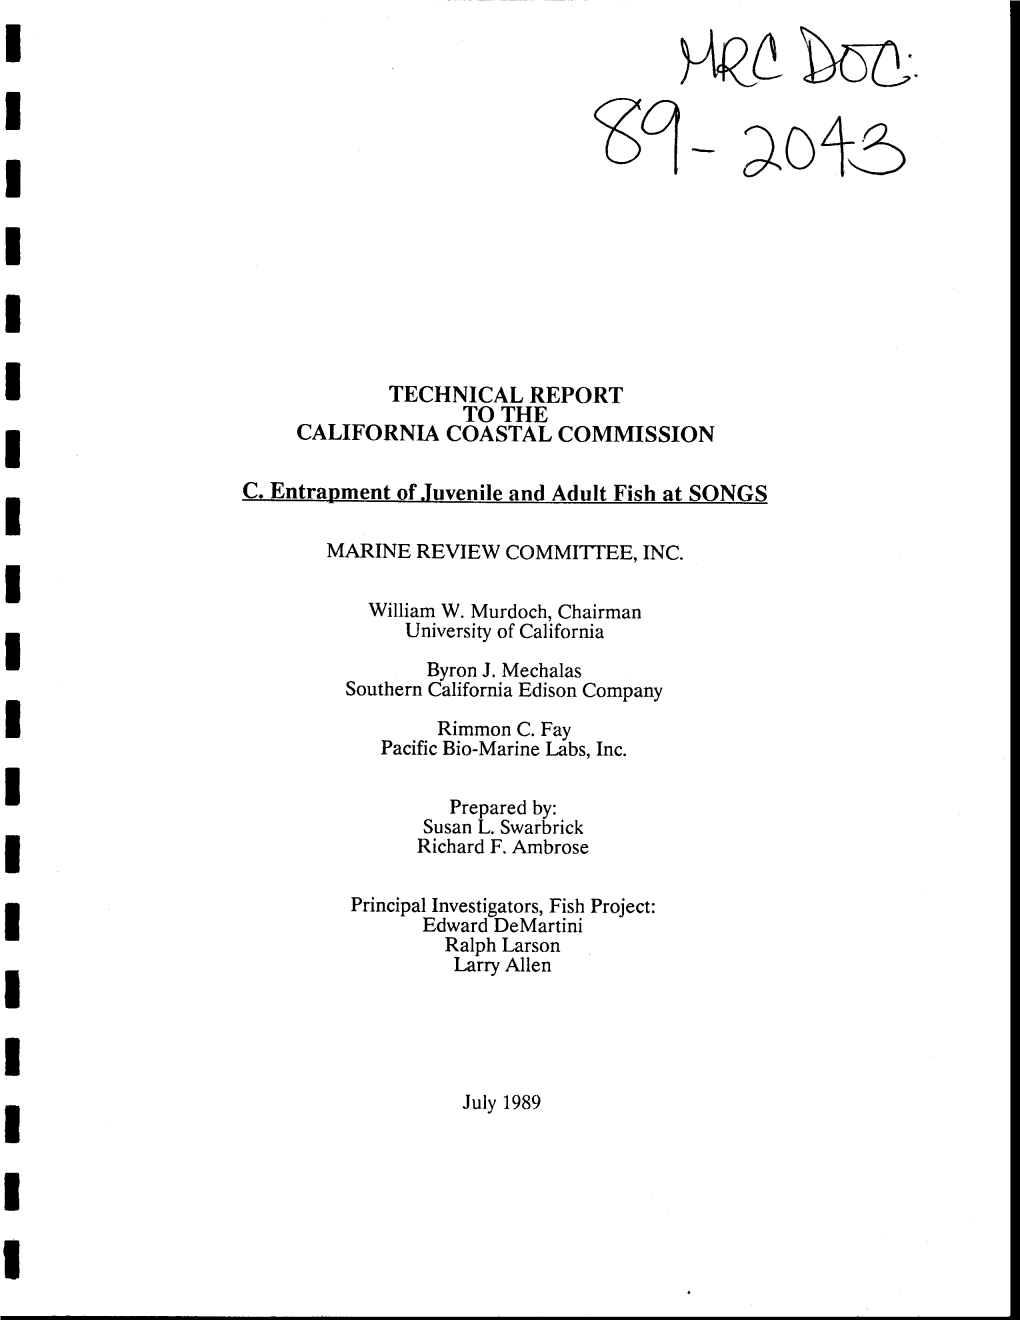 Final Technical Report of the Marine Review Committee to the California